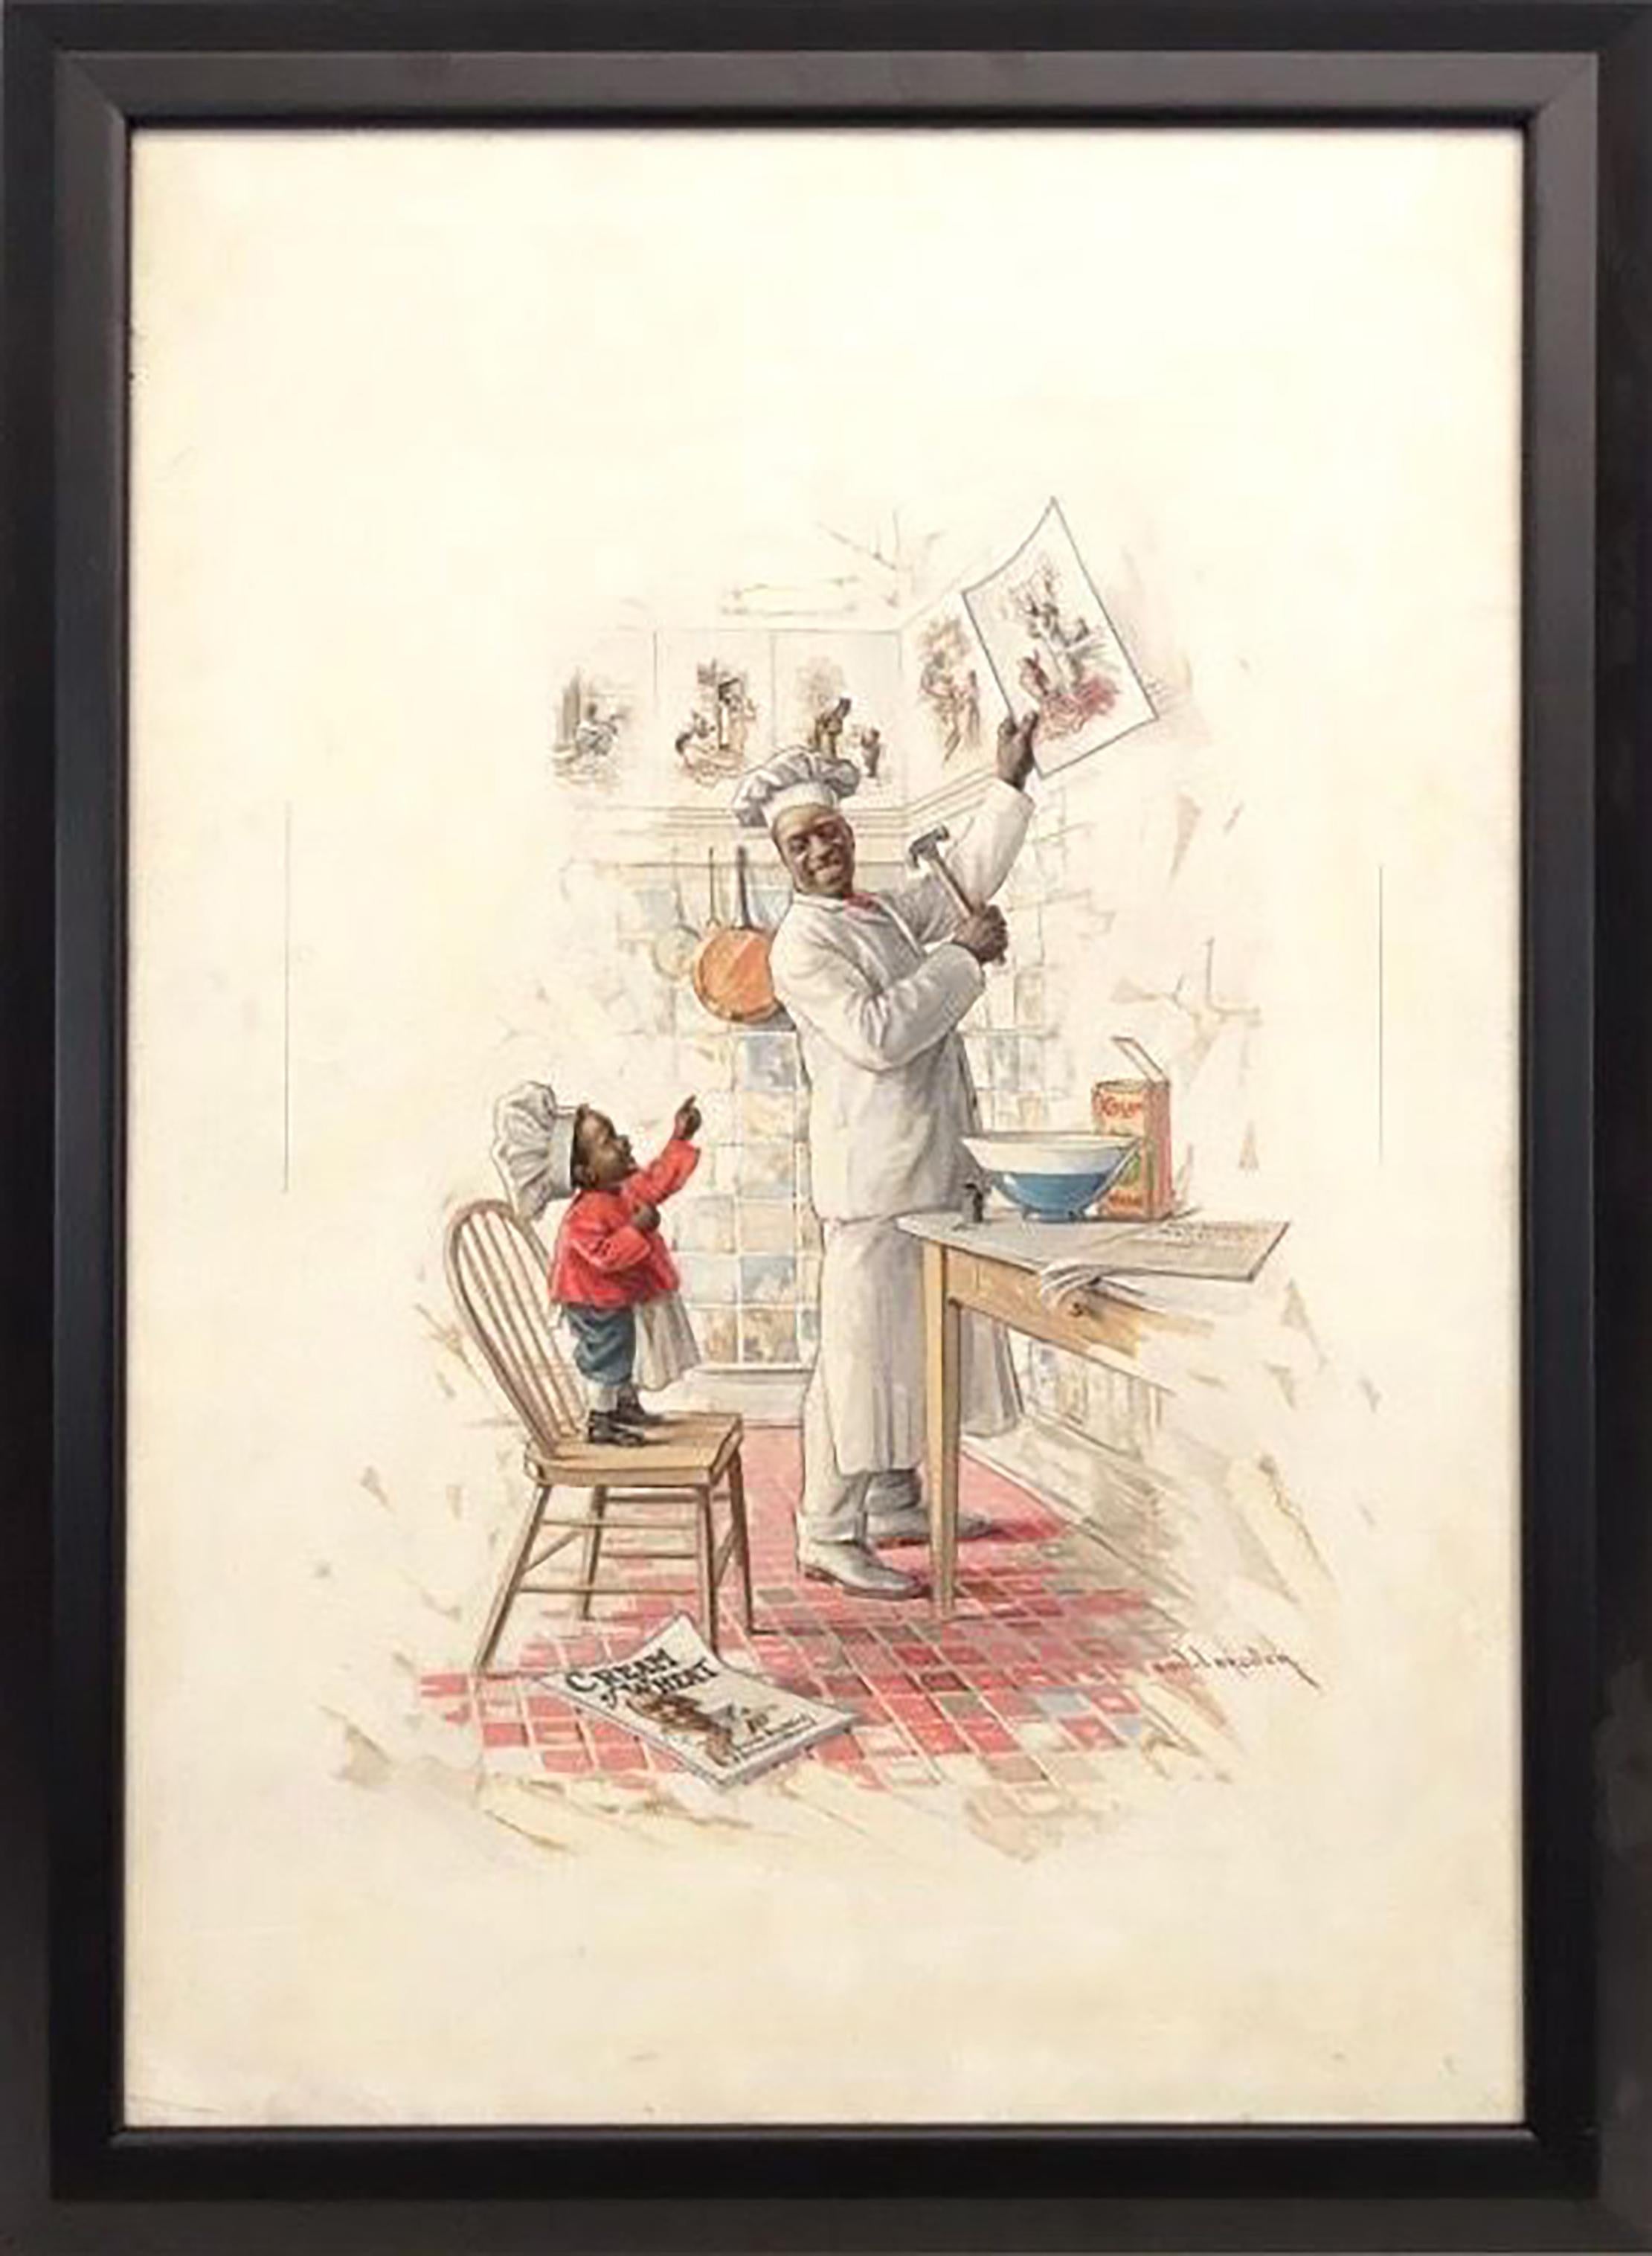 Cream of Wheat Advertisement - Painting by Edward Brewer